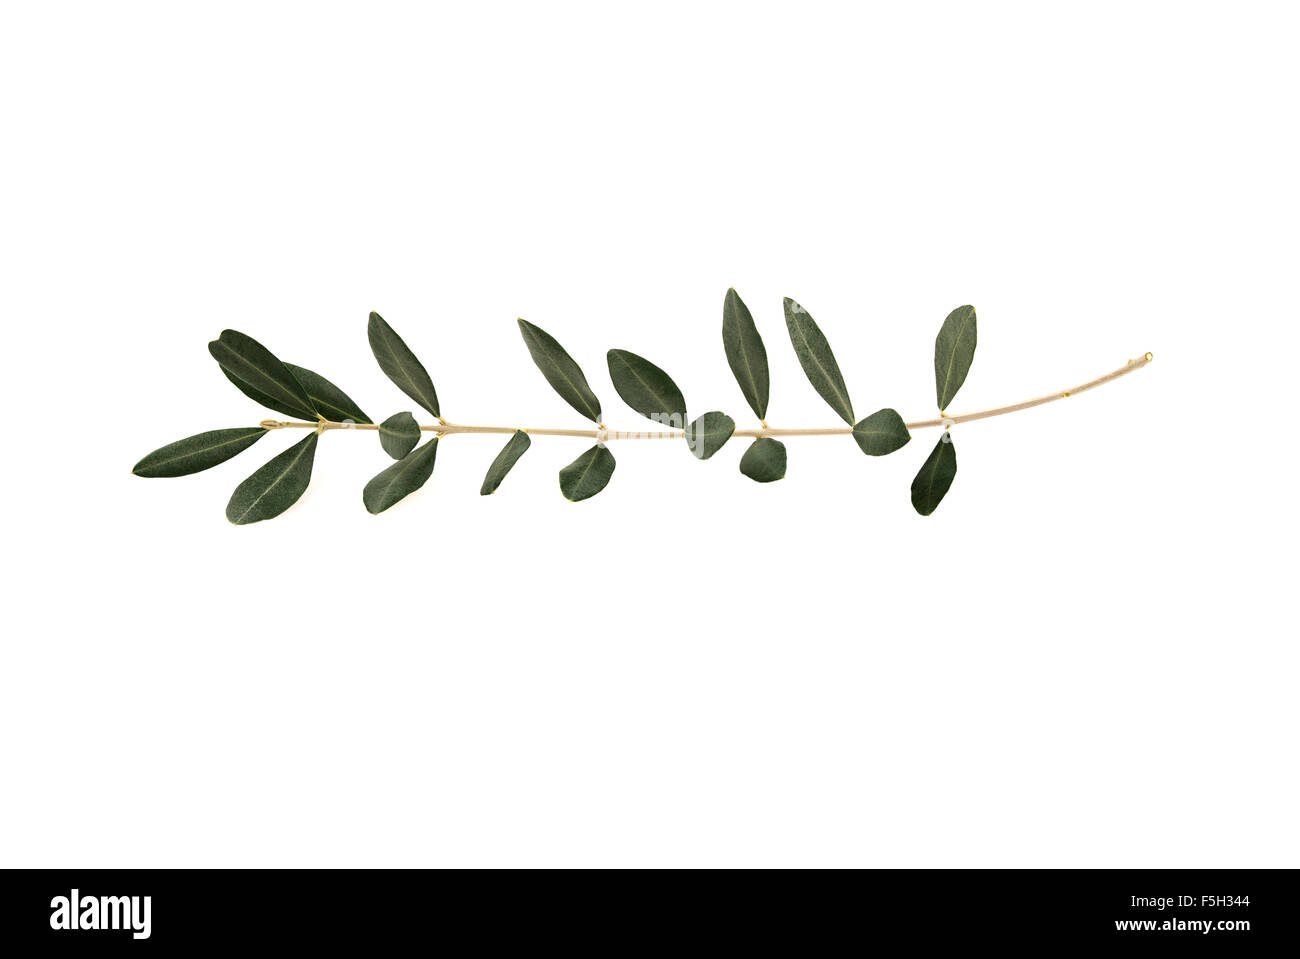 Olive tree twig with leaves isolated on white background. A single branch of peace symbol Stock Photo